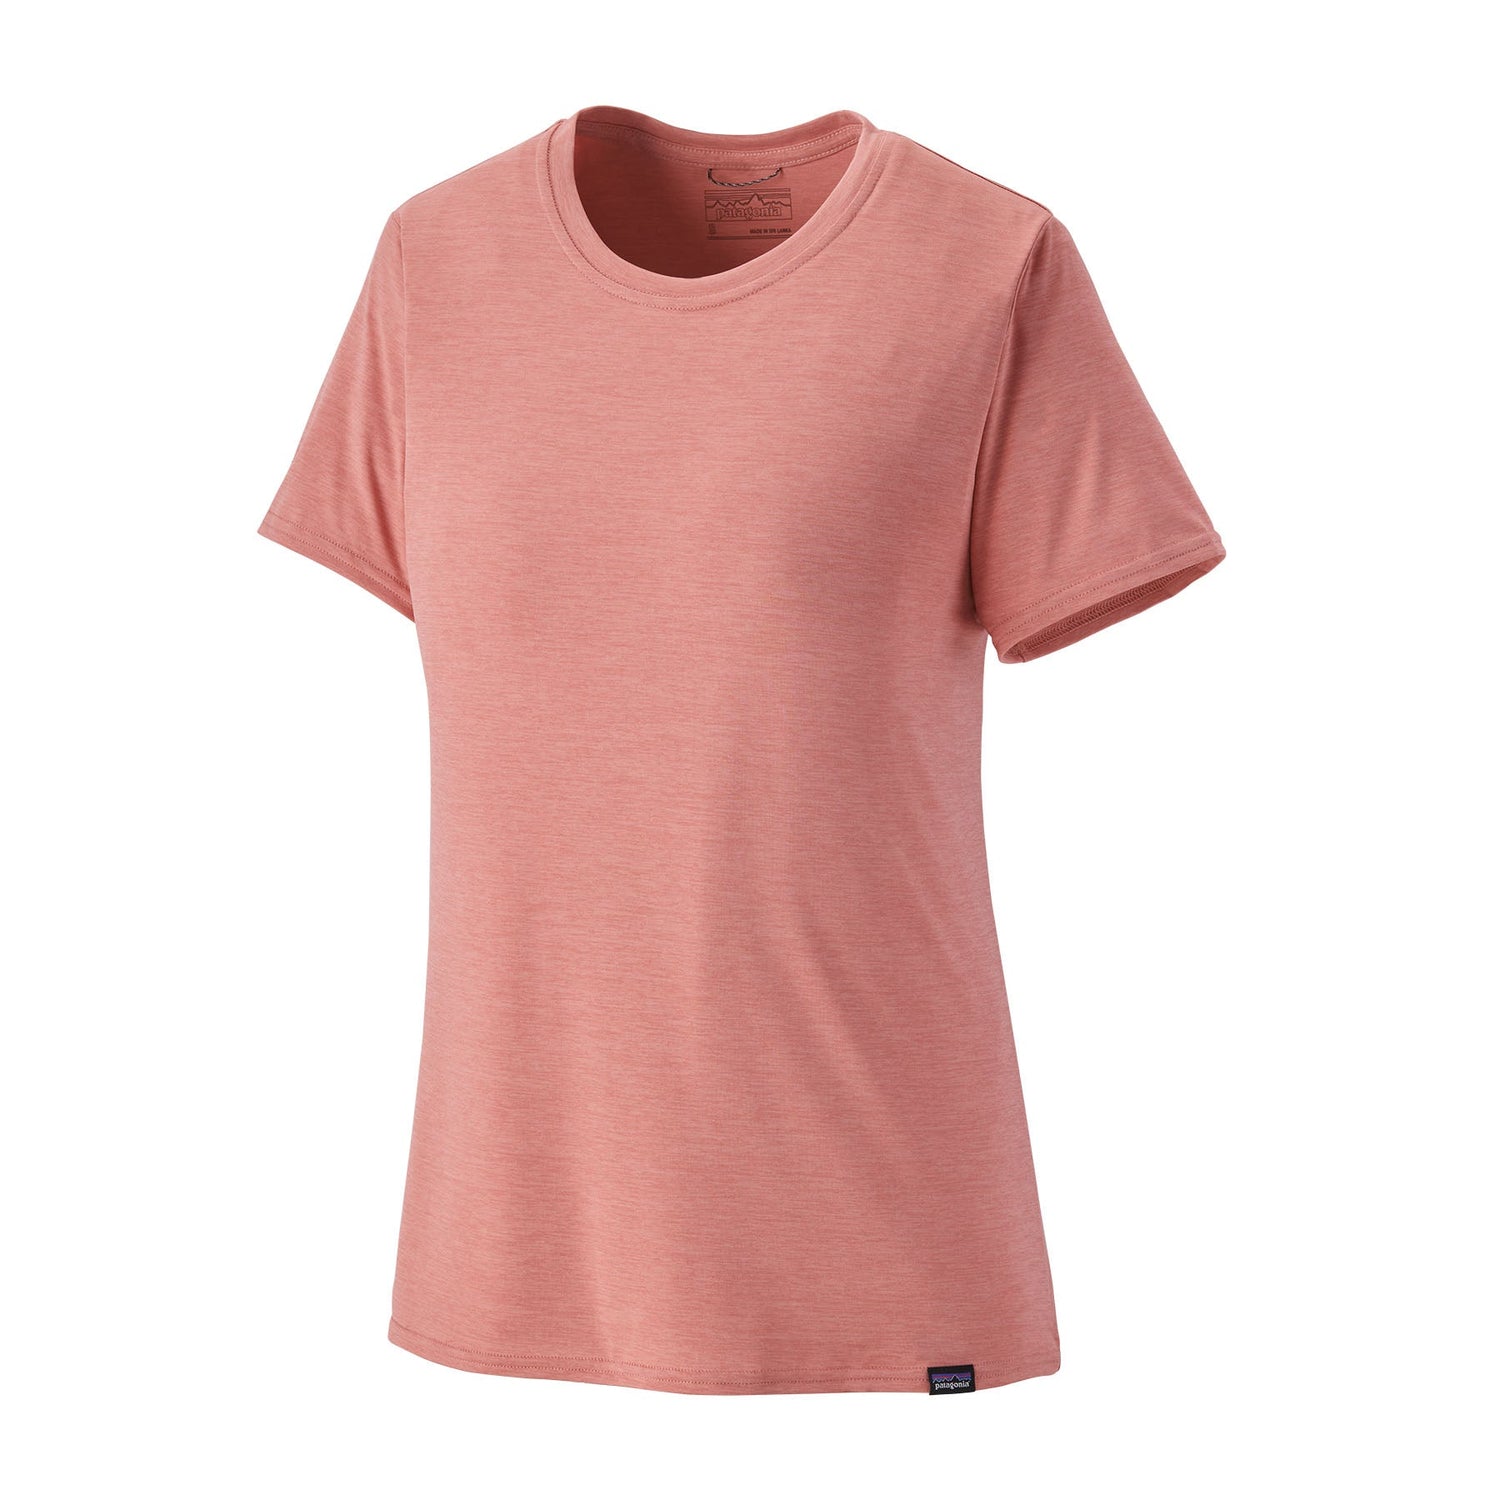 Patagonia W's Capilene Cool Daily Shirt - Recycled Polyester Sunfade Pink - Light Sunfade Pink X-Dye Shirt